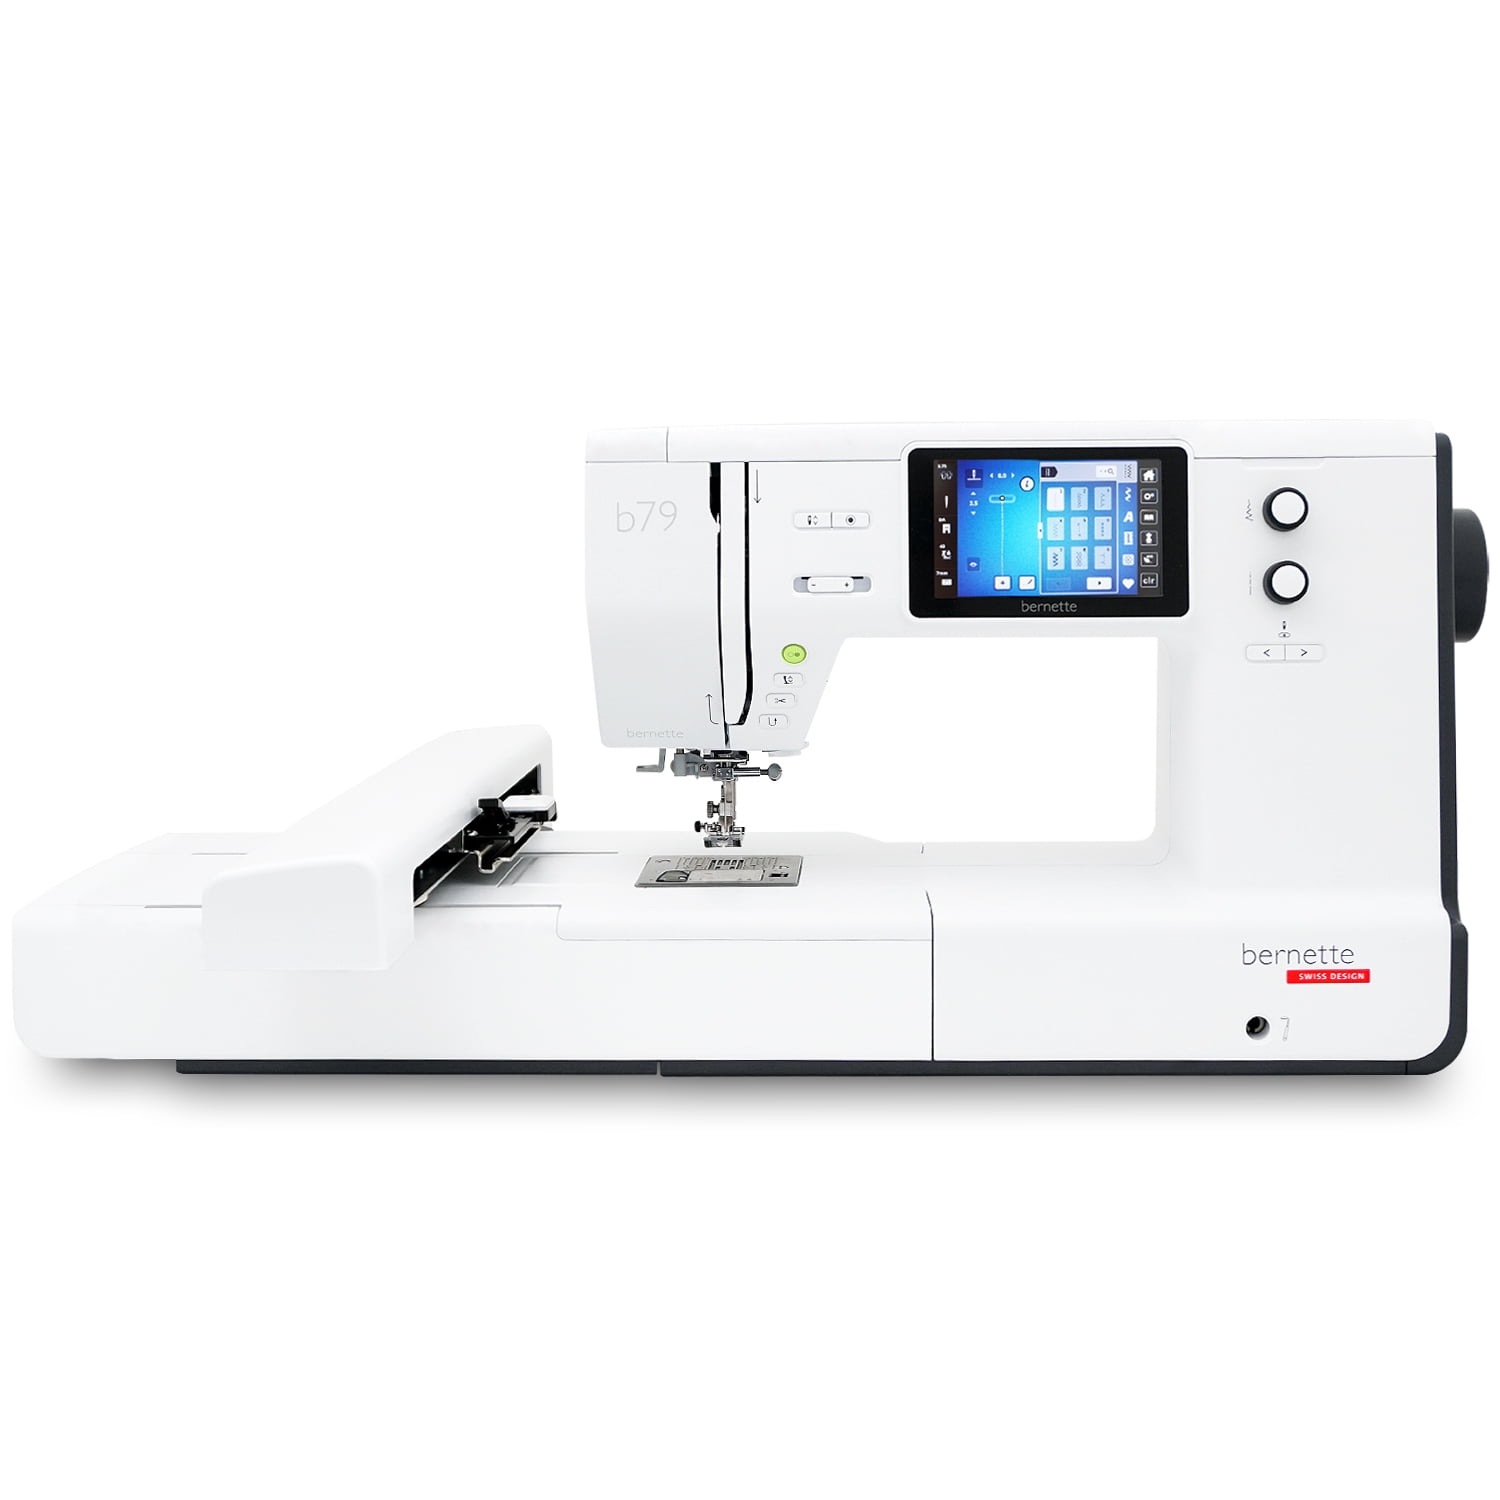 Brother SE700 Sewing and Embroidery Machine with $799 Bonus Bundle